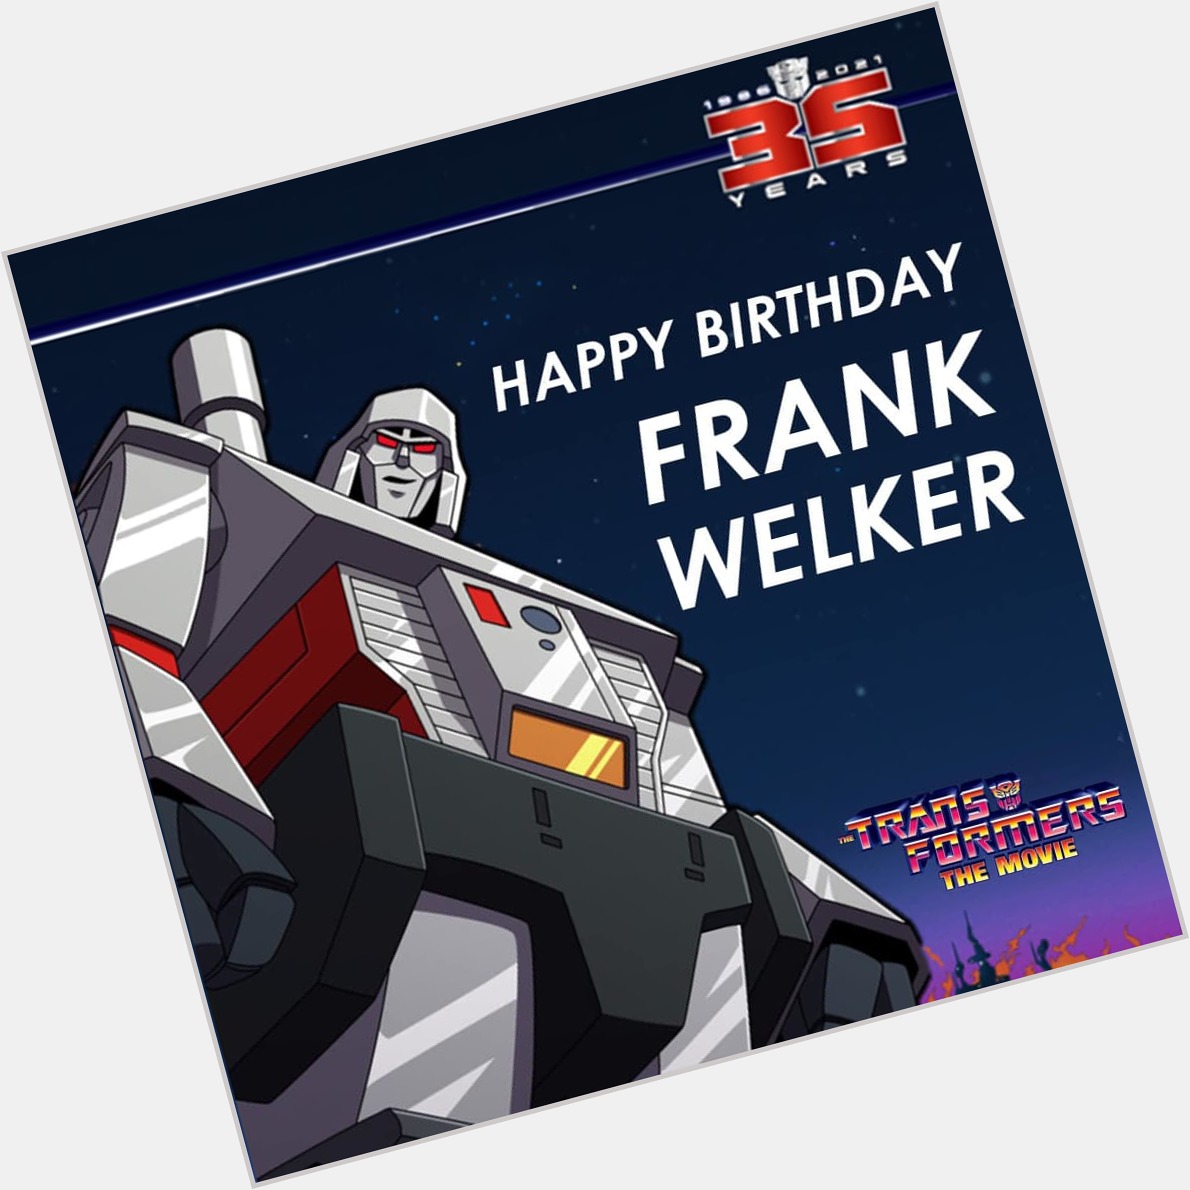 Happy Birthday to the great Frank Welker   